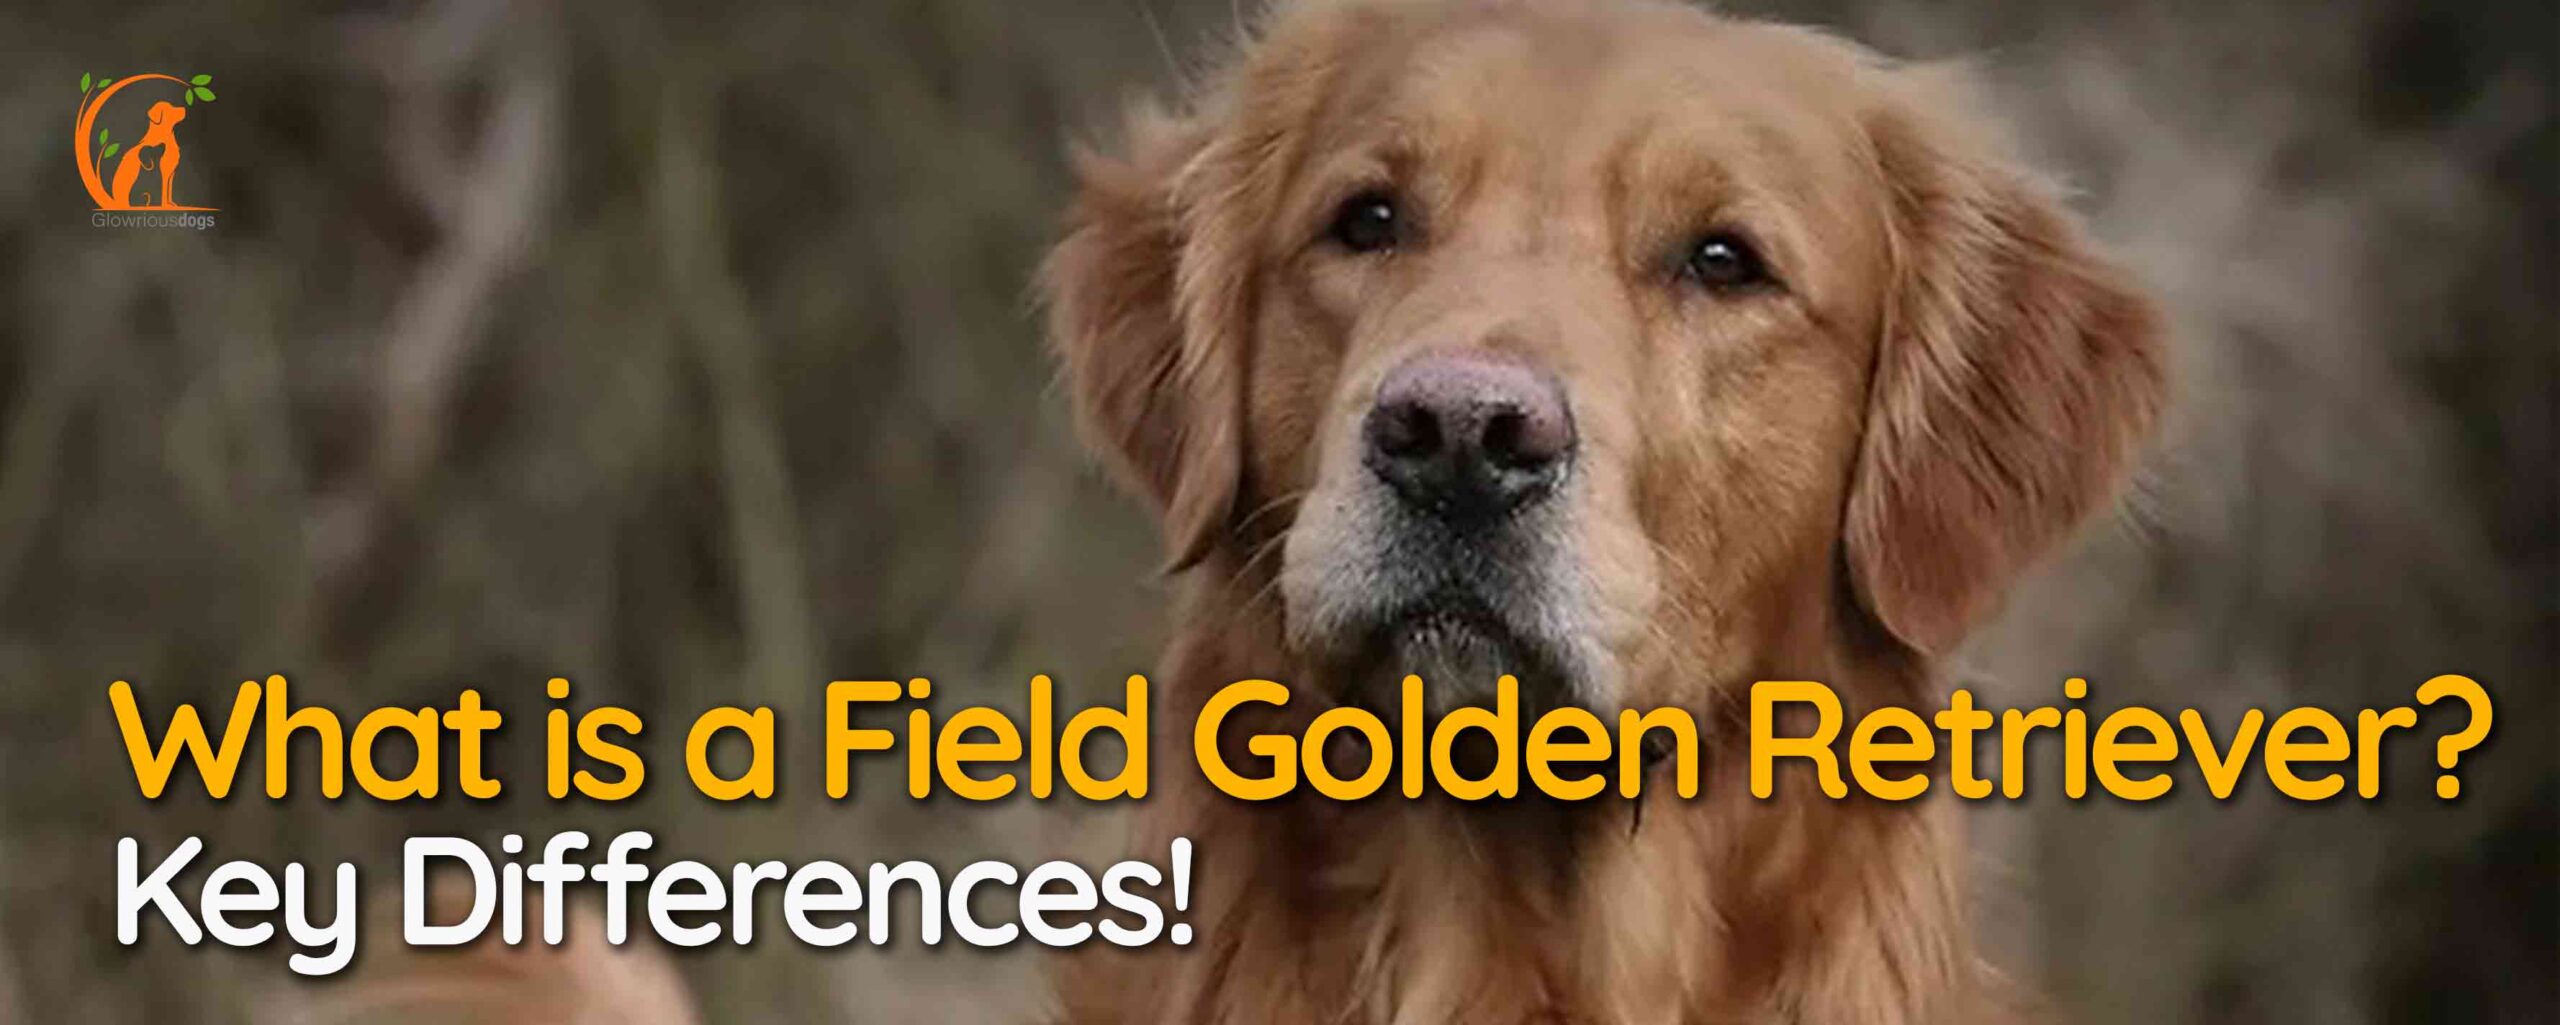 What is a Field Golden Retriever? Key Differences!